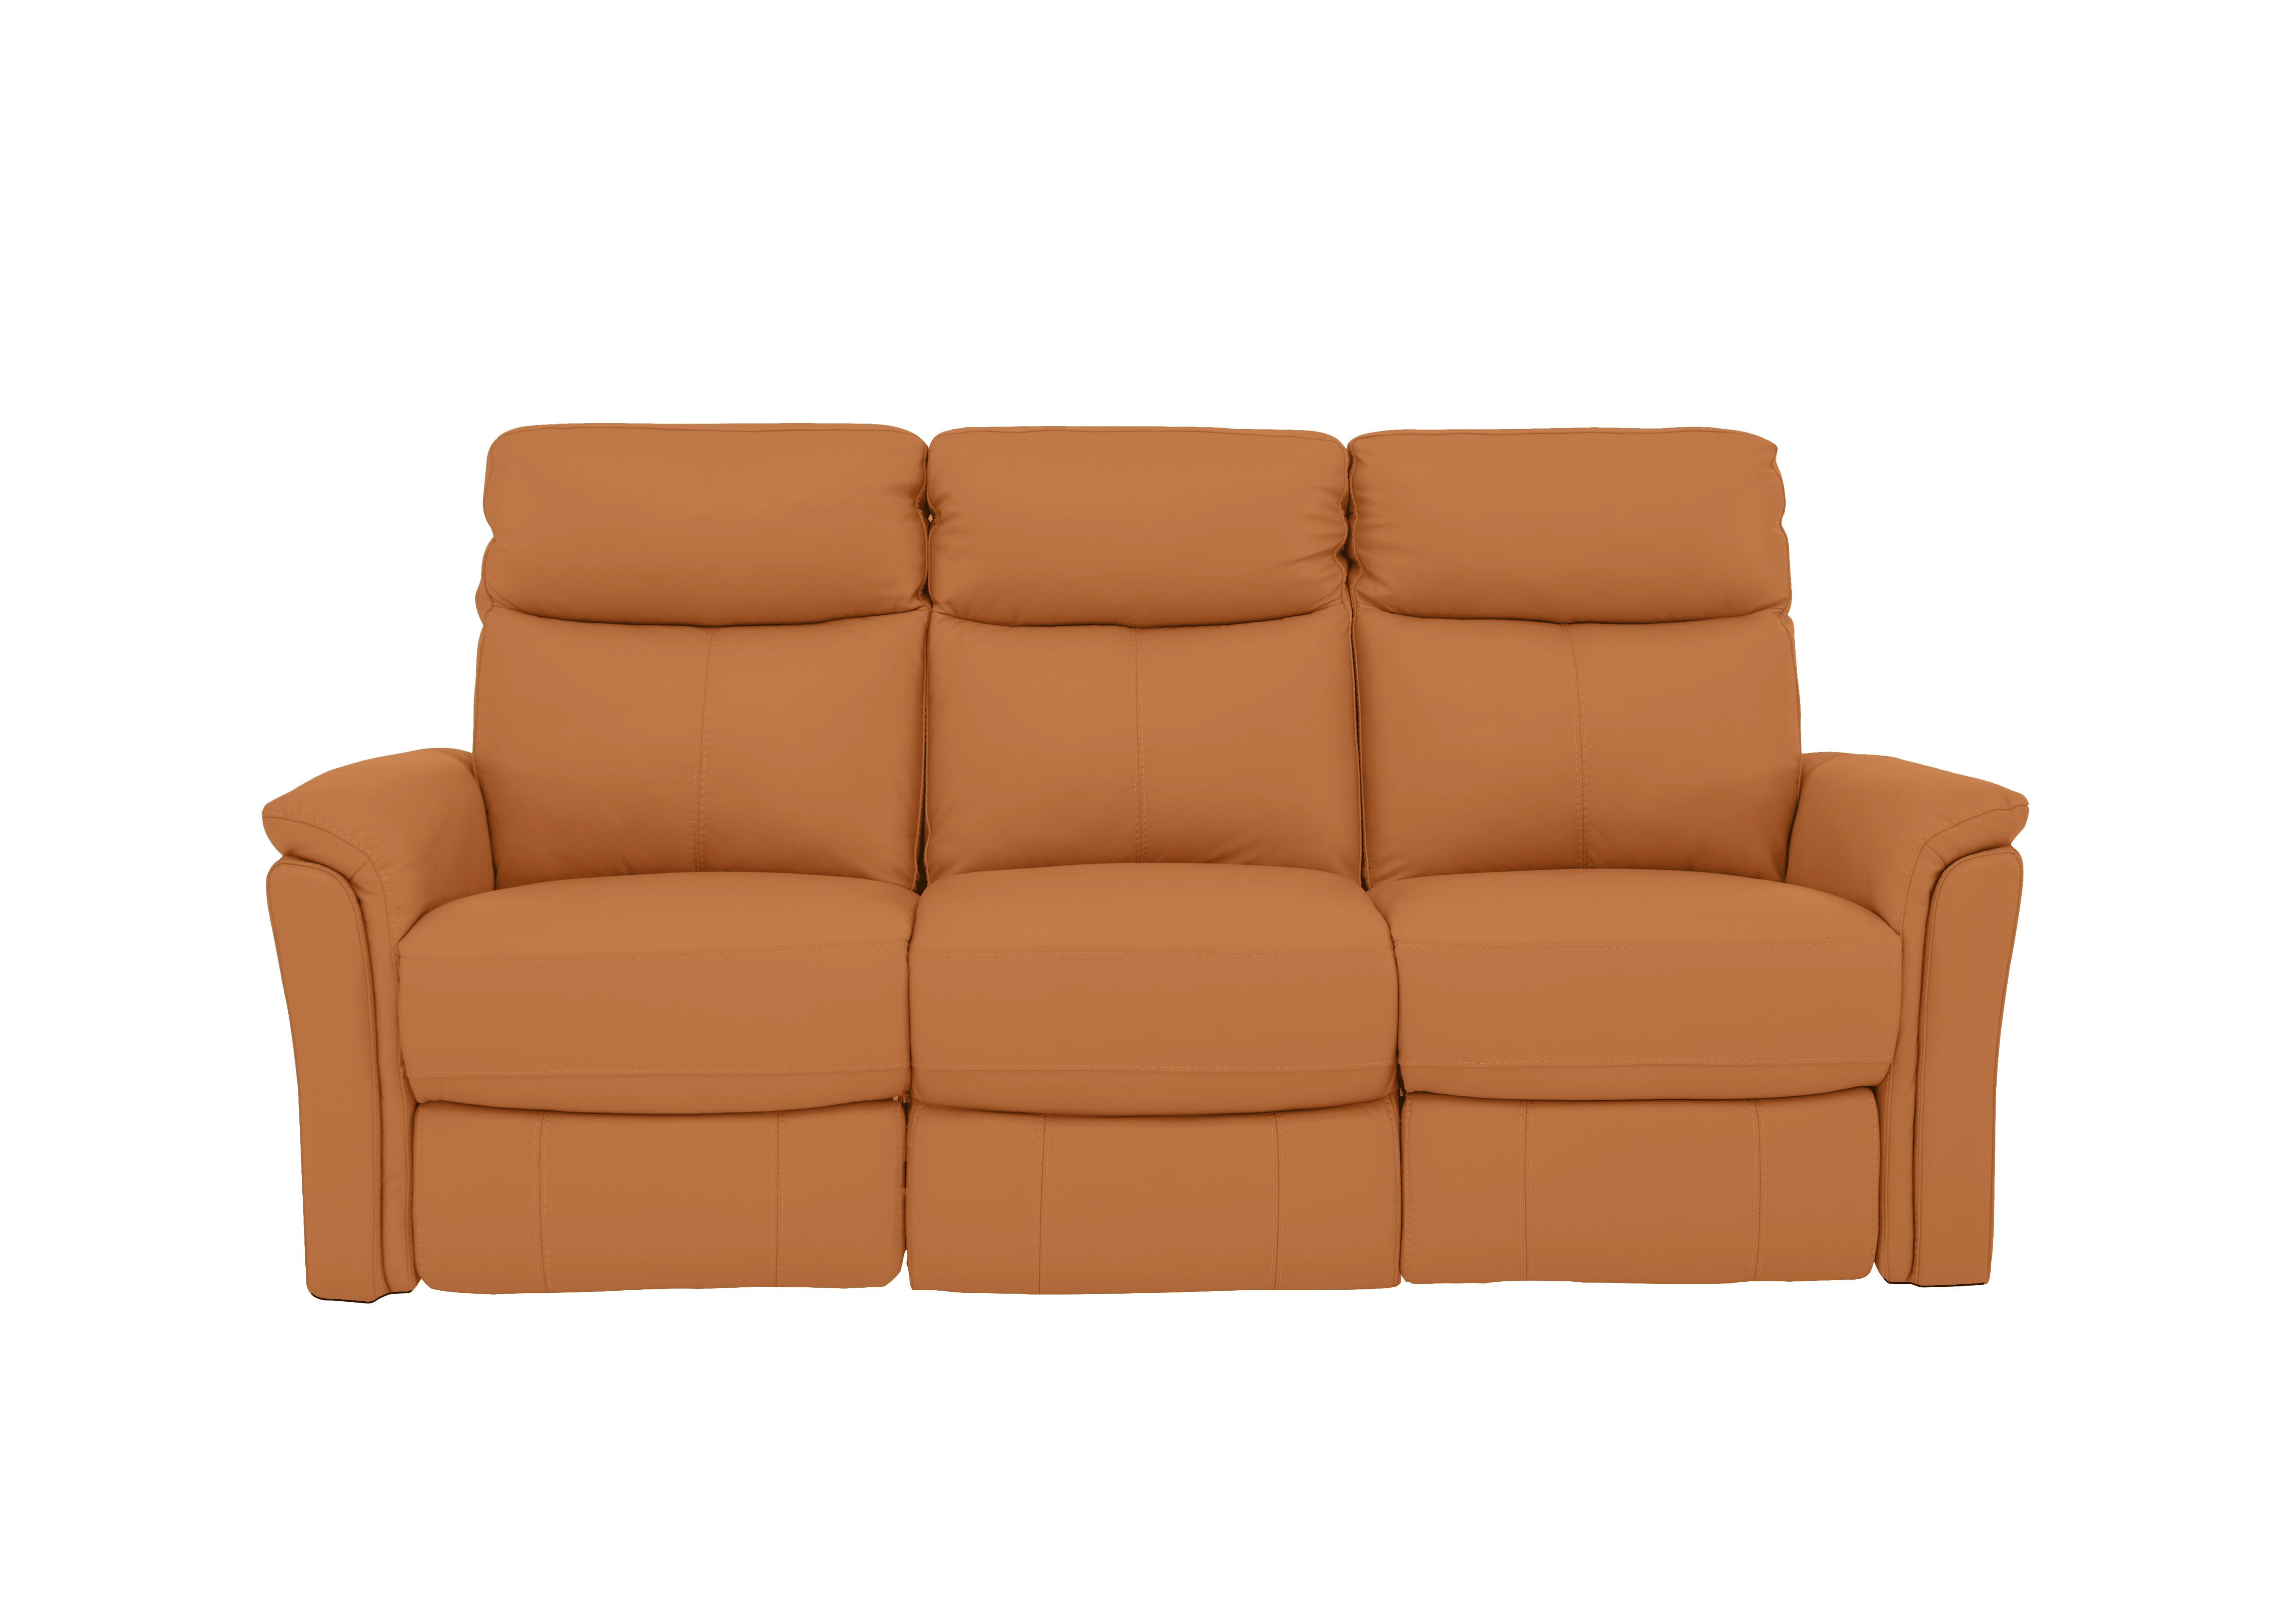 Compact Collection Piccolo 3 Seater Sofa in Bv-335e Honey Yellow on Furniture Village